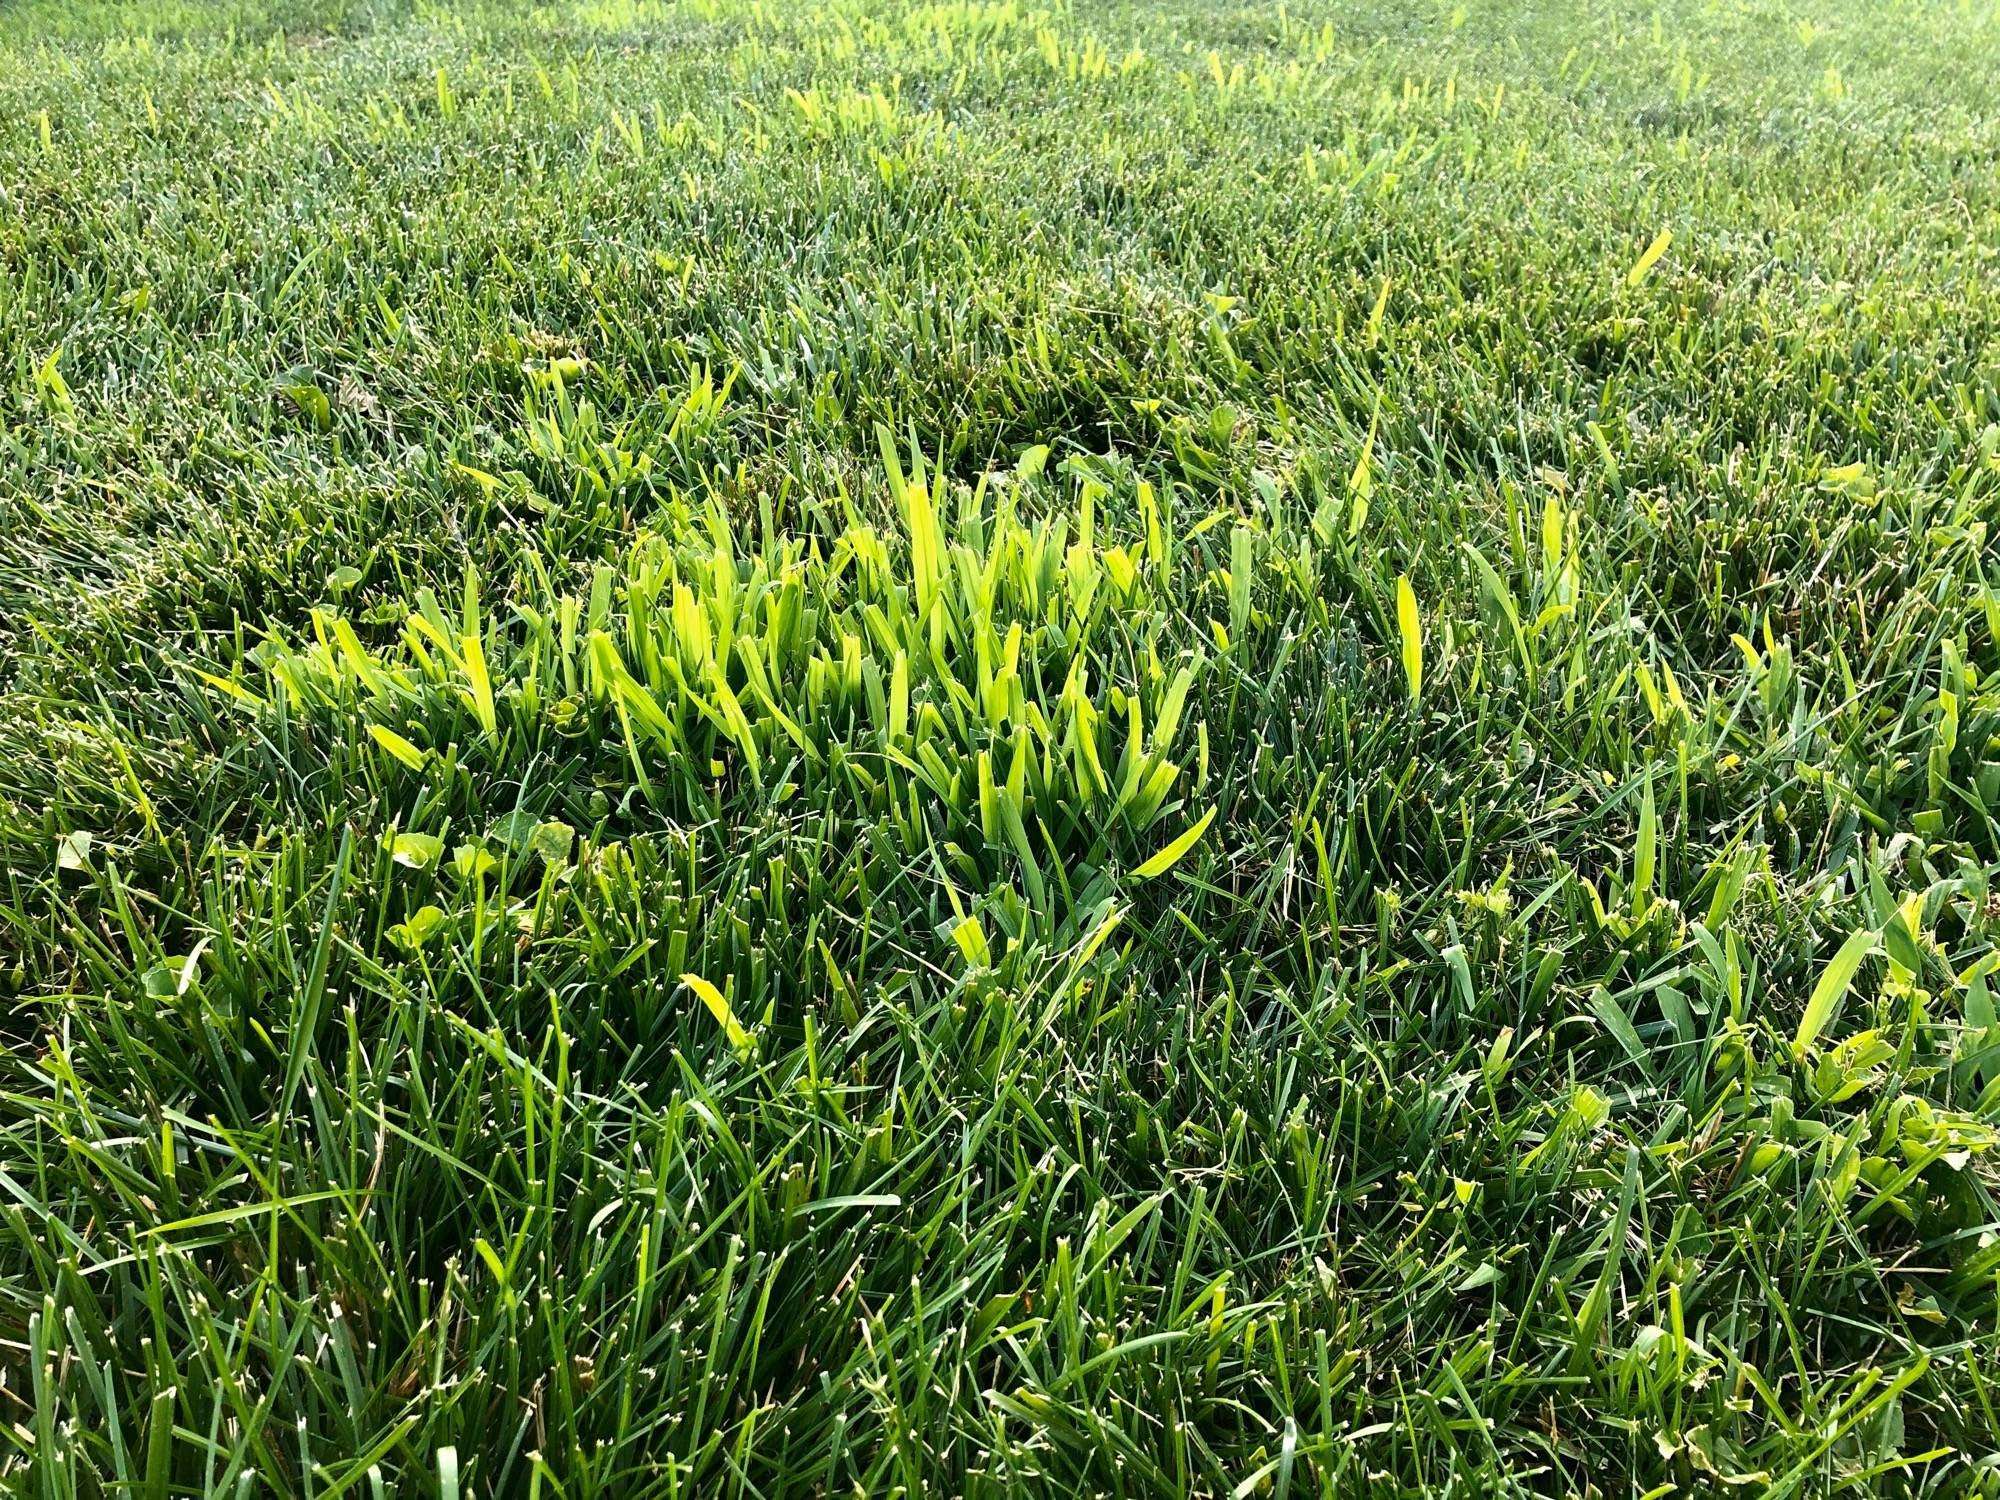 Bright green, fast growing grass, popping up in the last few weeks ...